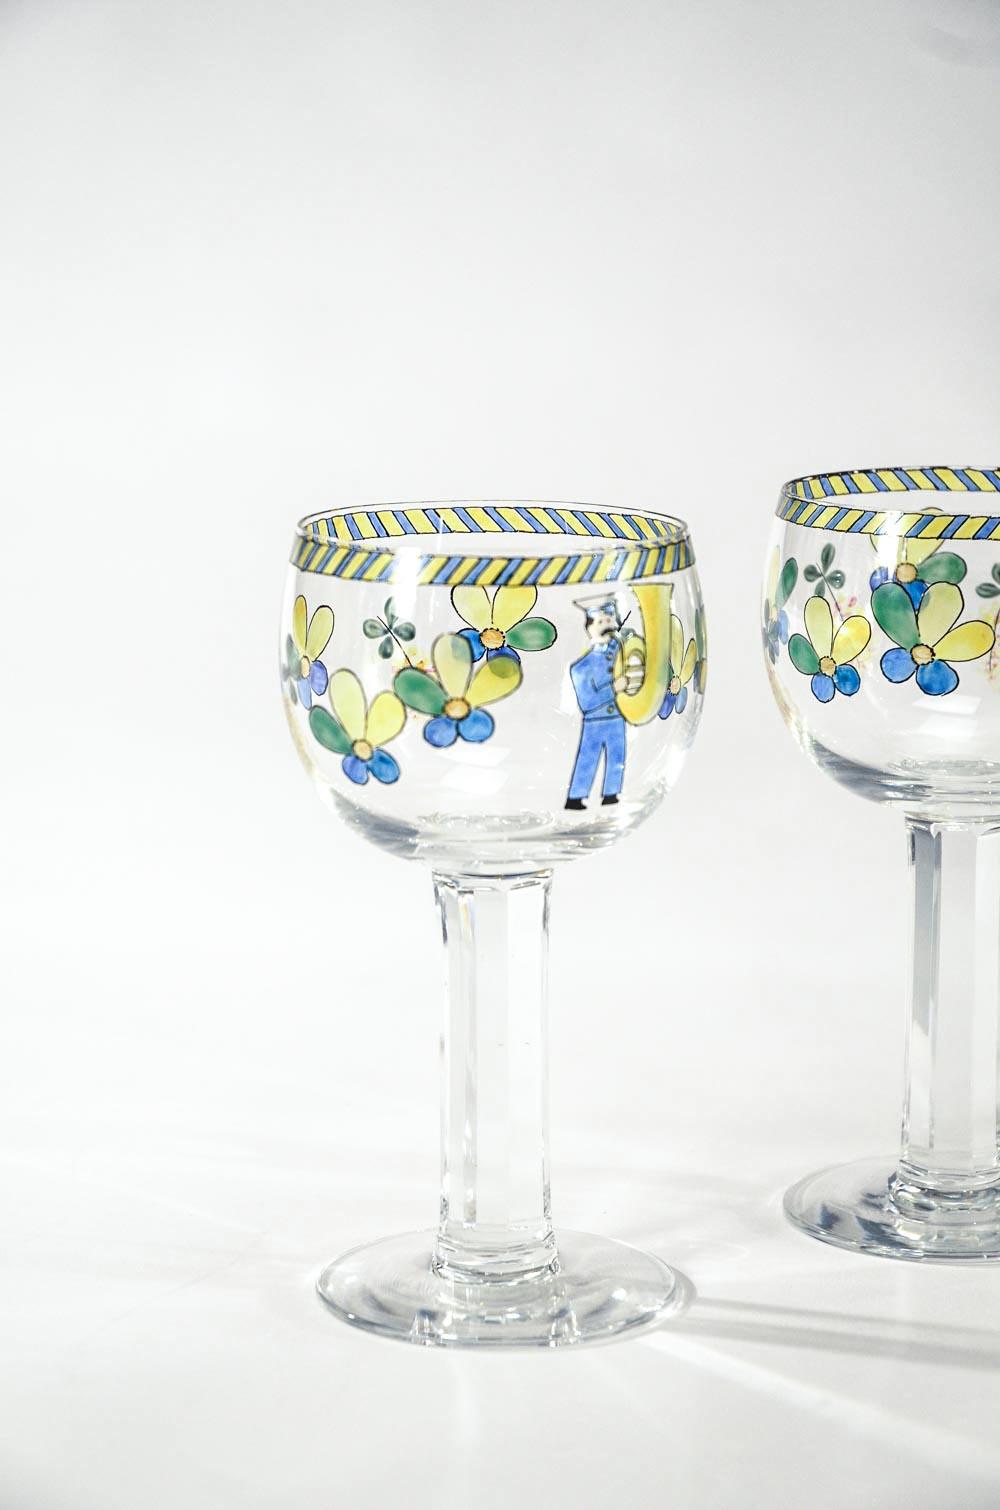 Blown Glass Set of 11 Signed Orrefors Hand Painted Enamel Goblets W/ Whimsical Decoration  For Sale